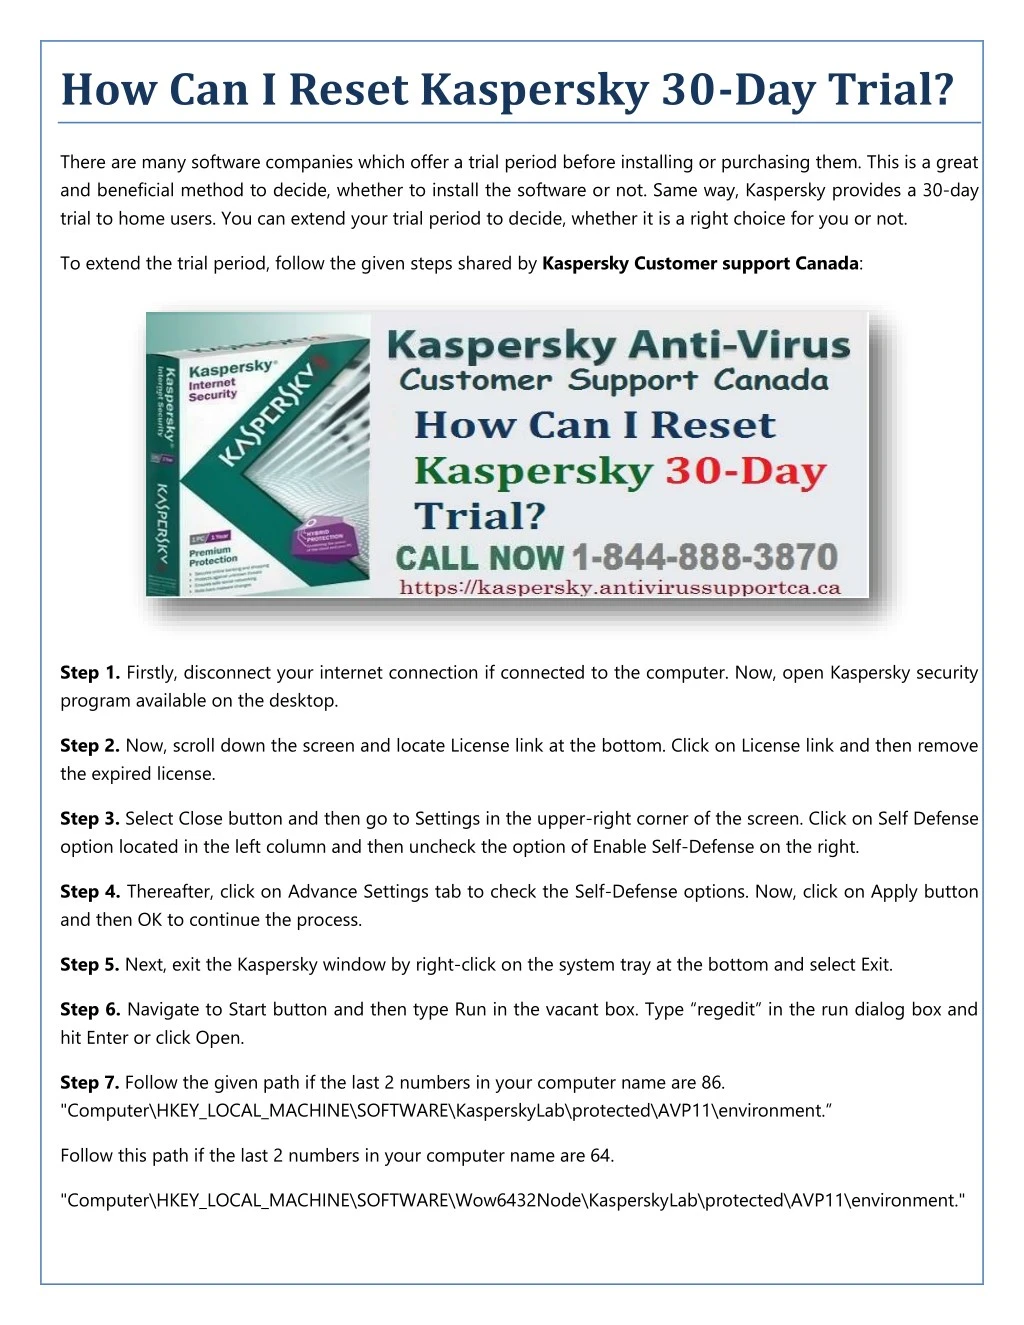 how can i reset kaspersky 30 day trial